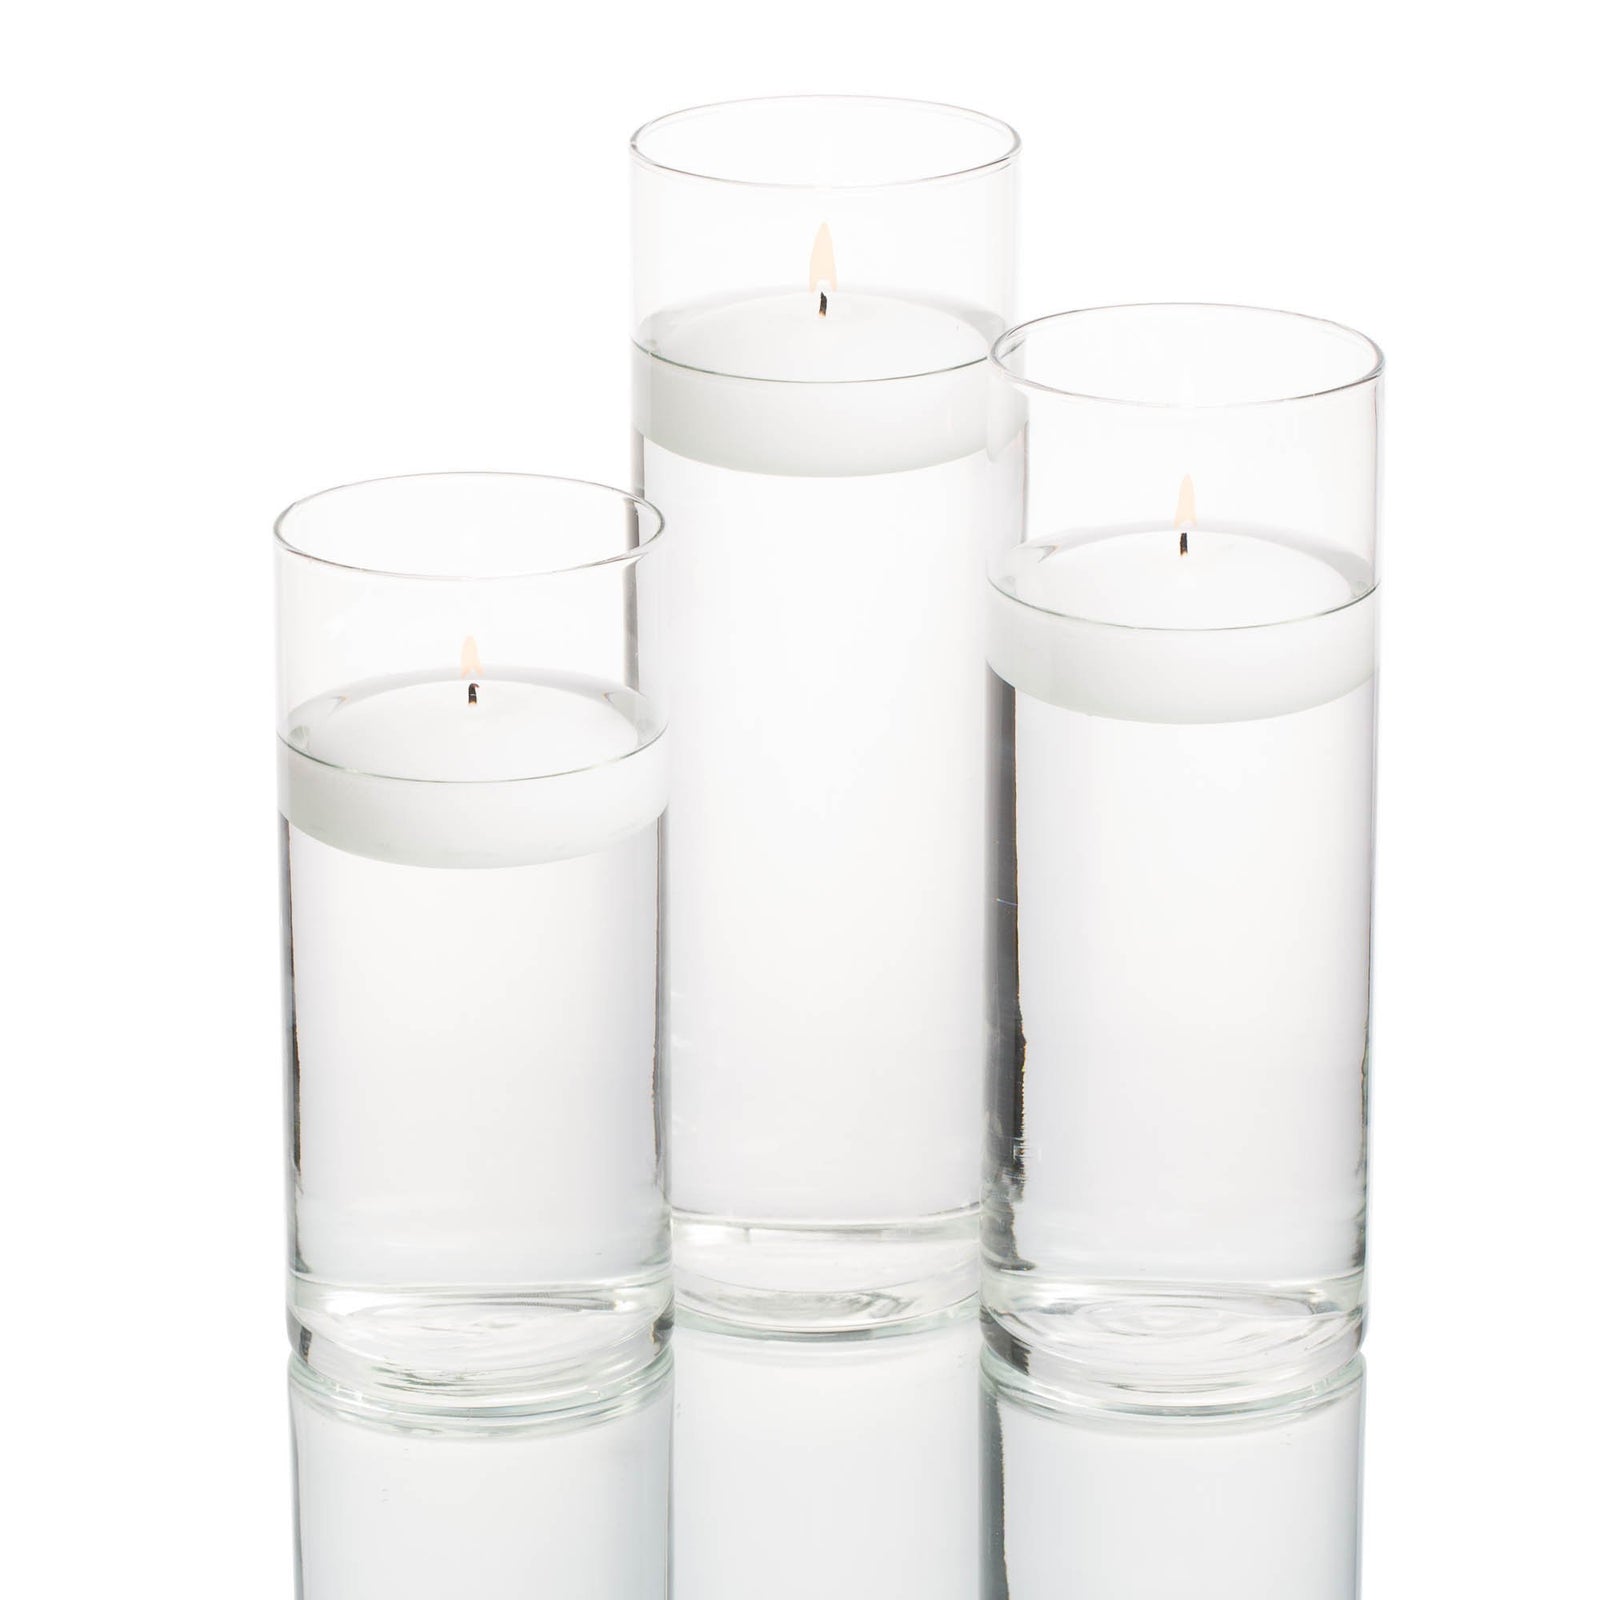 Illuminate Your Home with Clear Glass Hanging Votive Cups - Set of 6